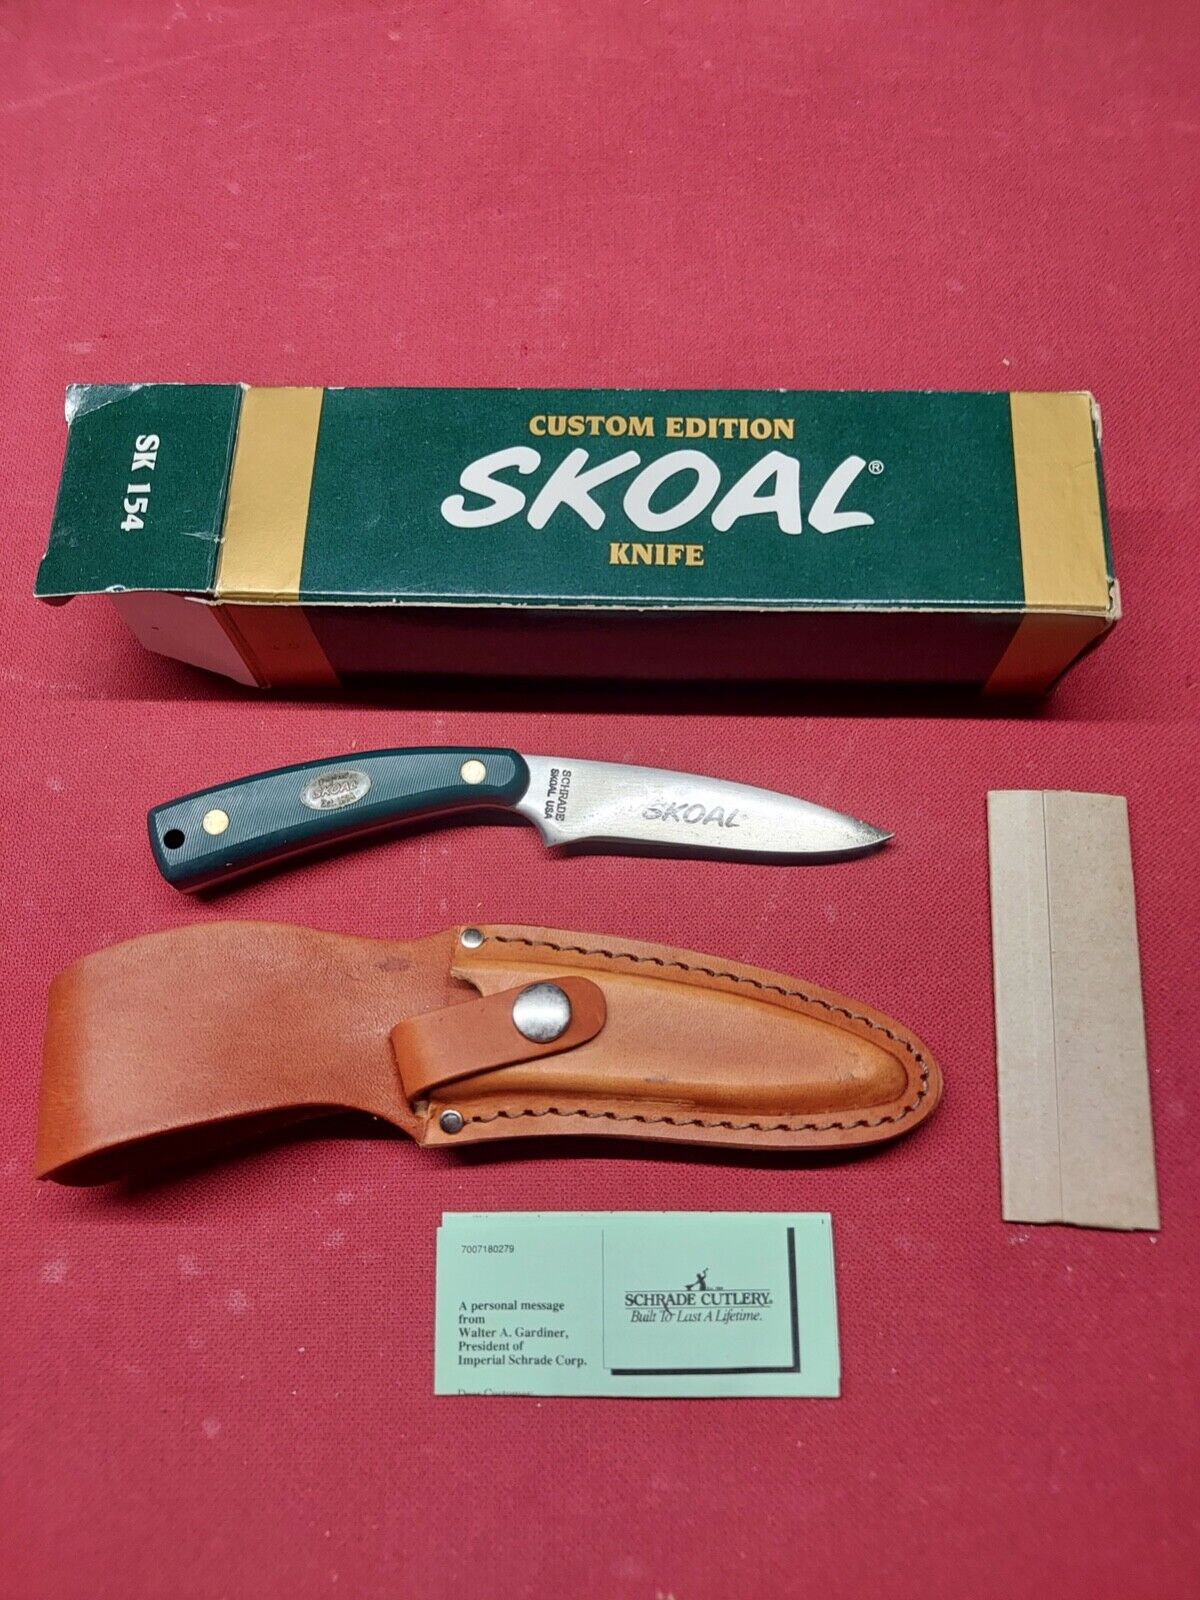 Knife #163 Skoal Custom Edition SK154 with Leather Sheath and Box Case Schrade